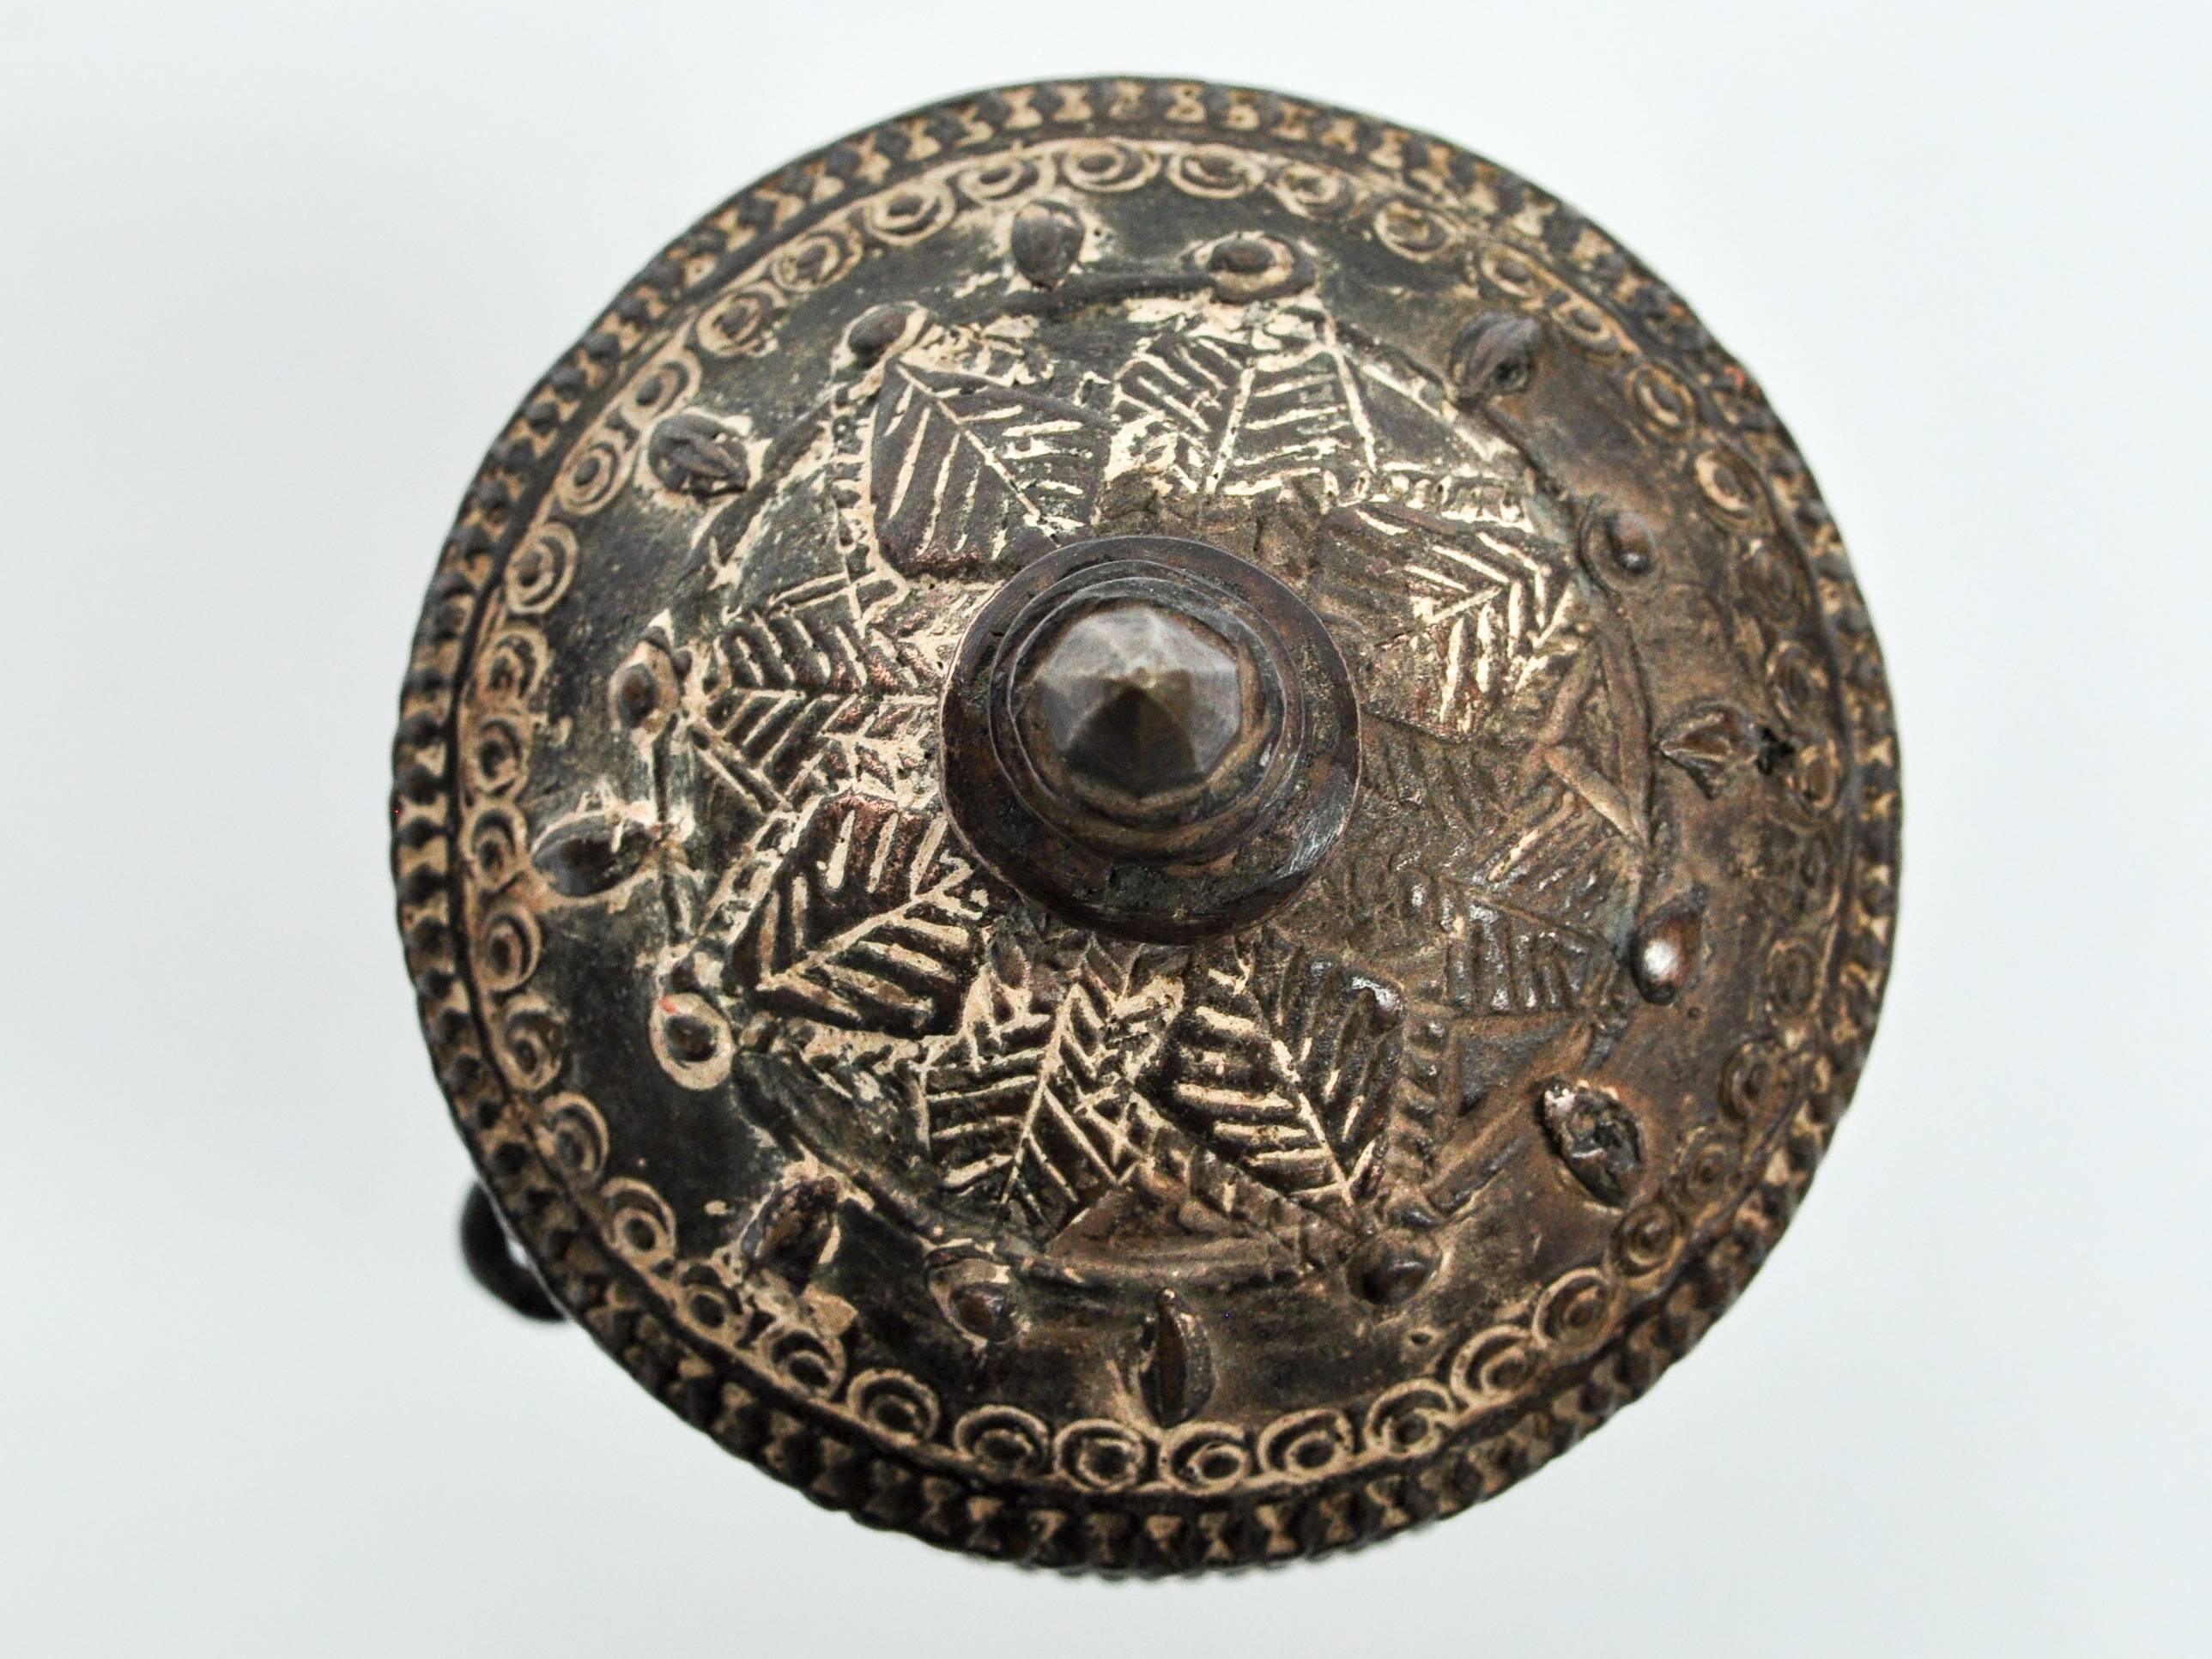 Bronze lime container from Laos, mid-20th century.
This bronze lime container is from the Lao Theung of Laos, a collection of Mon-Khumer speaking peoples who make up roughly a quarter of the country's population. Slaked lime is, along with the areca